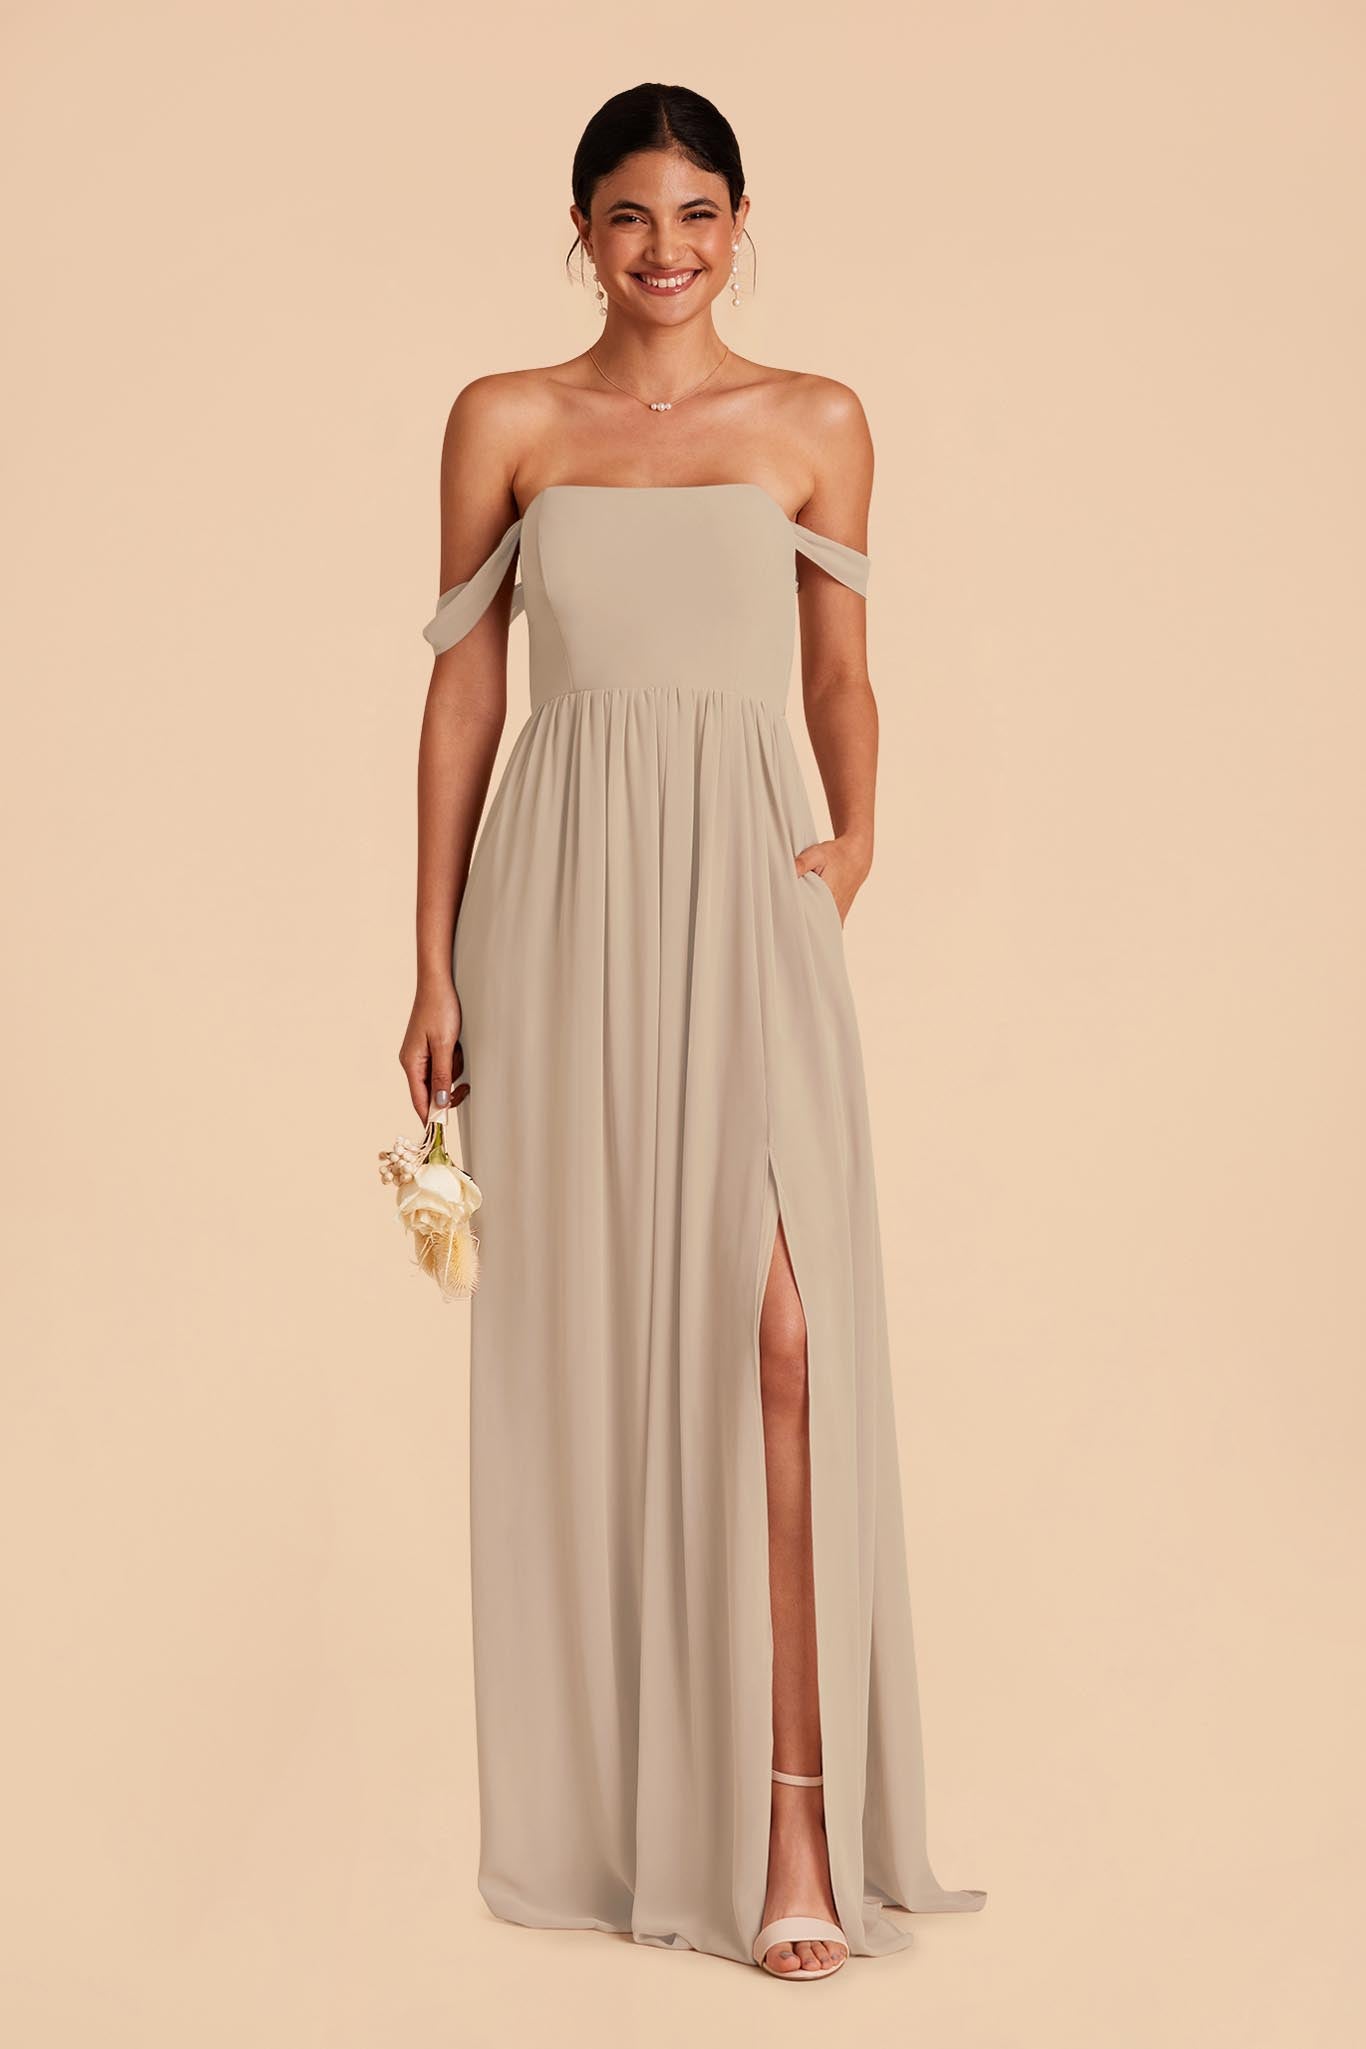 Almond August Convertible Dress by Birdy Grey